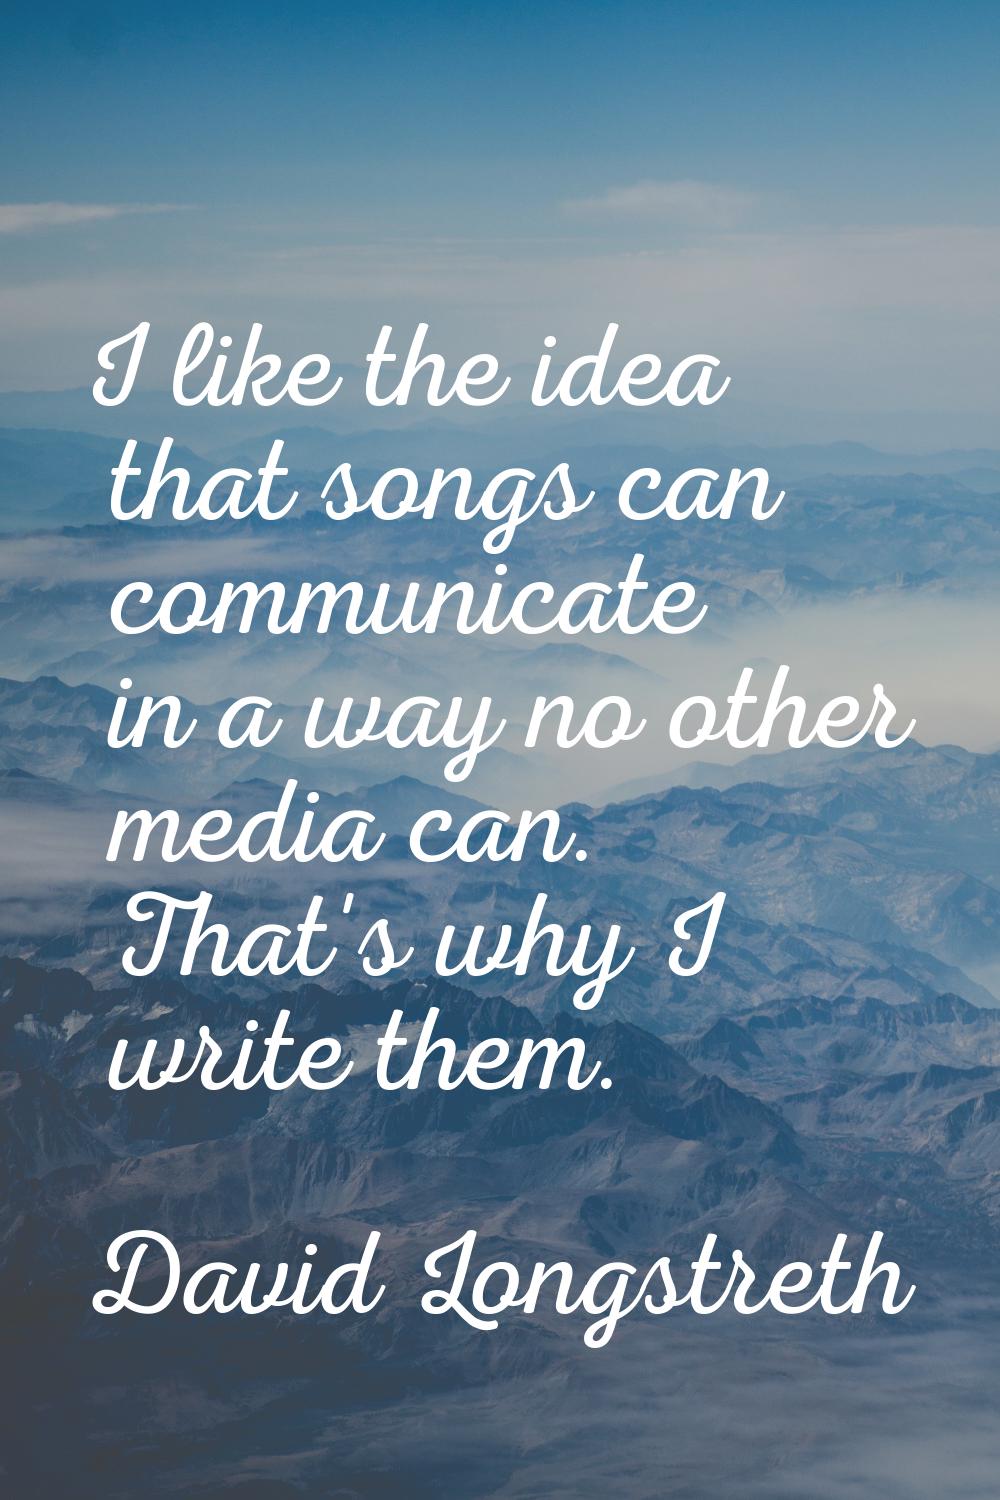 I like the idea that songs can communicate in a way no other media can. That's why I write them.